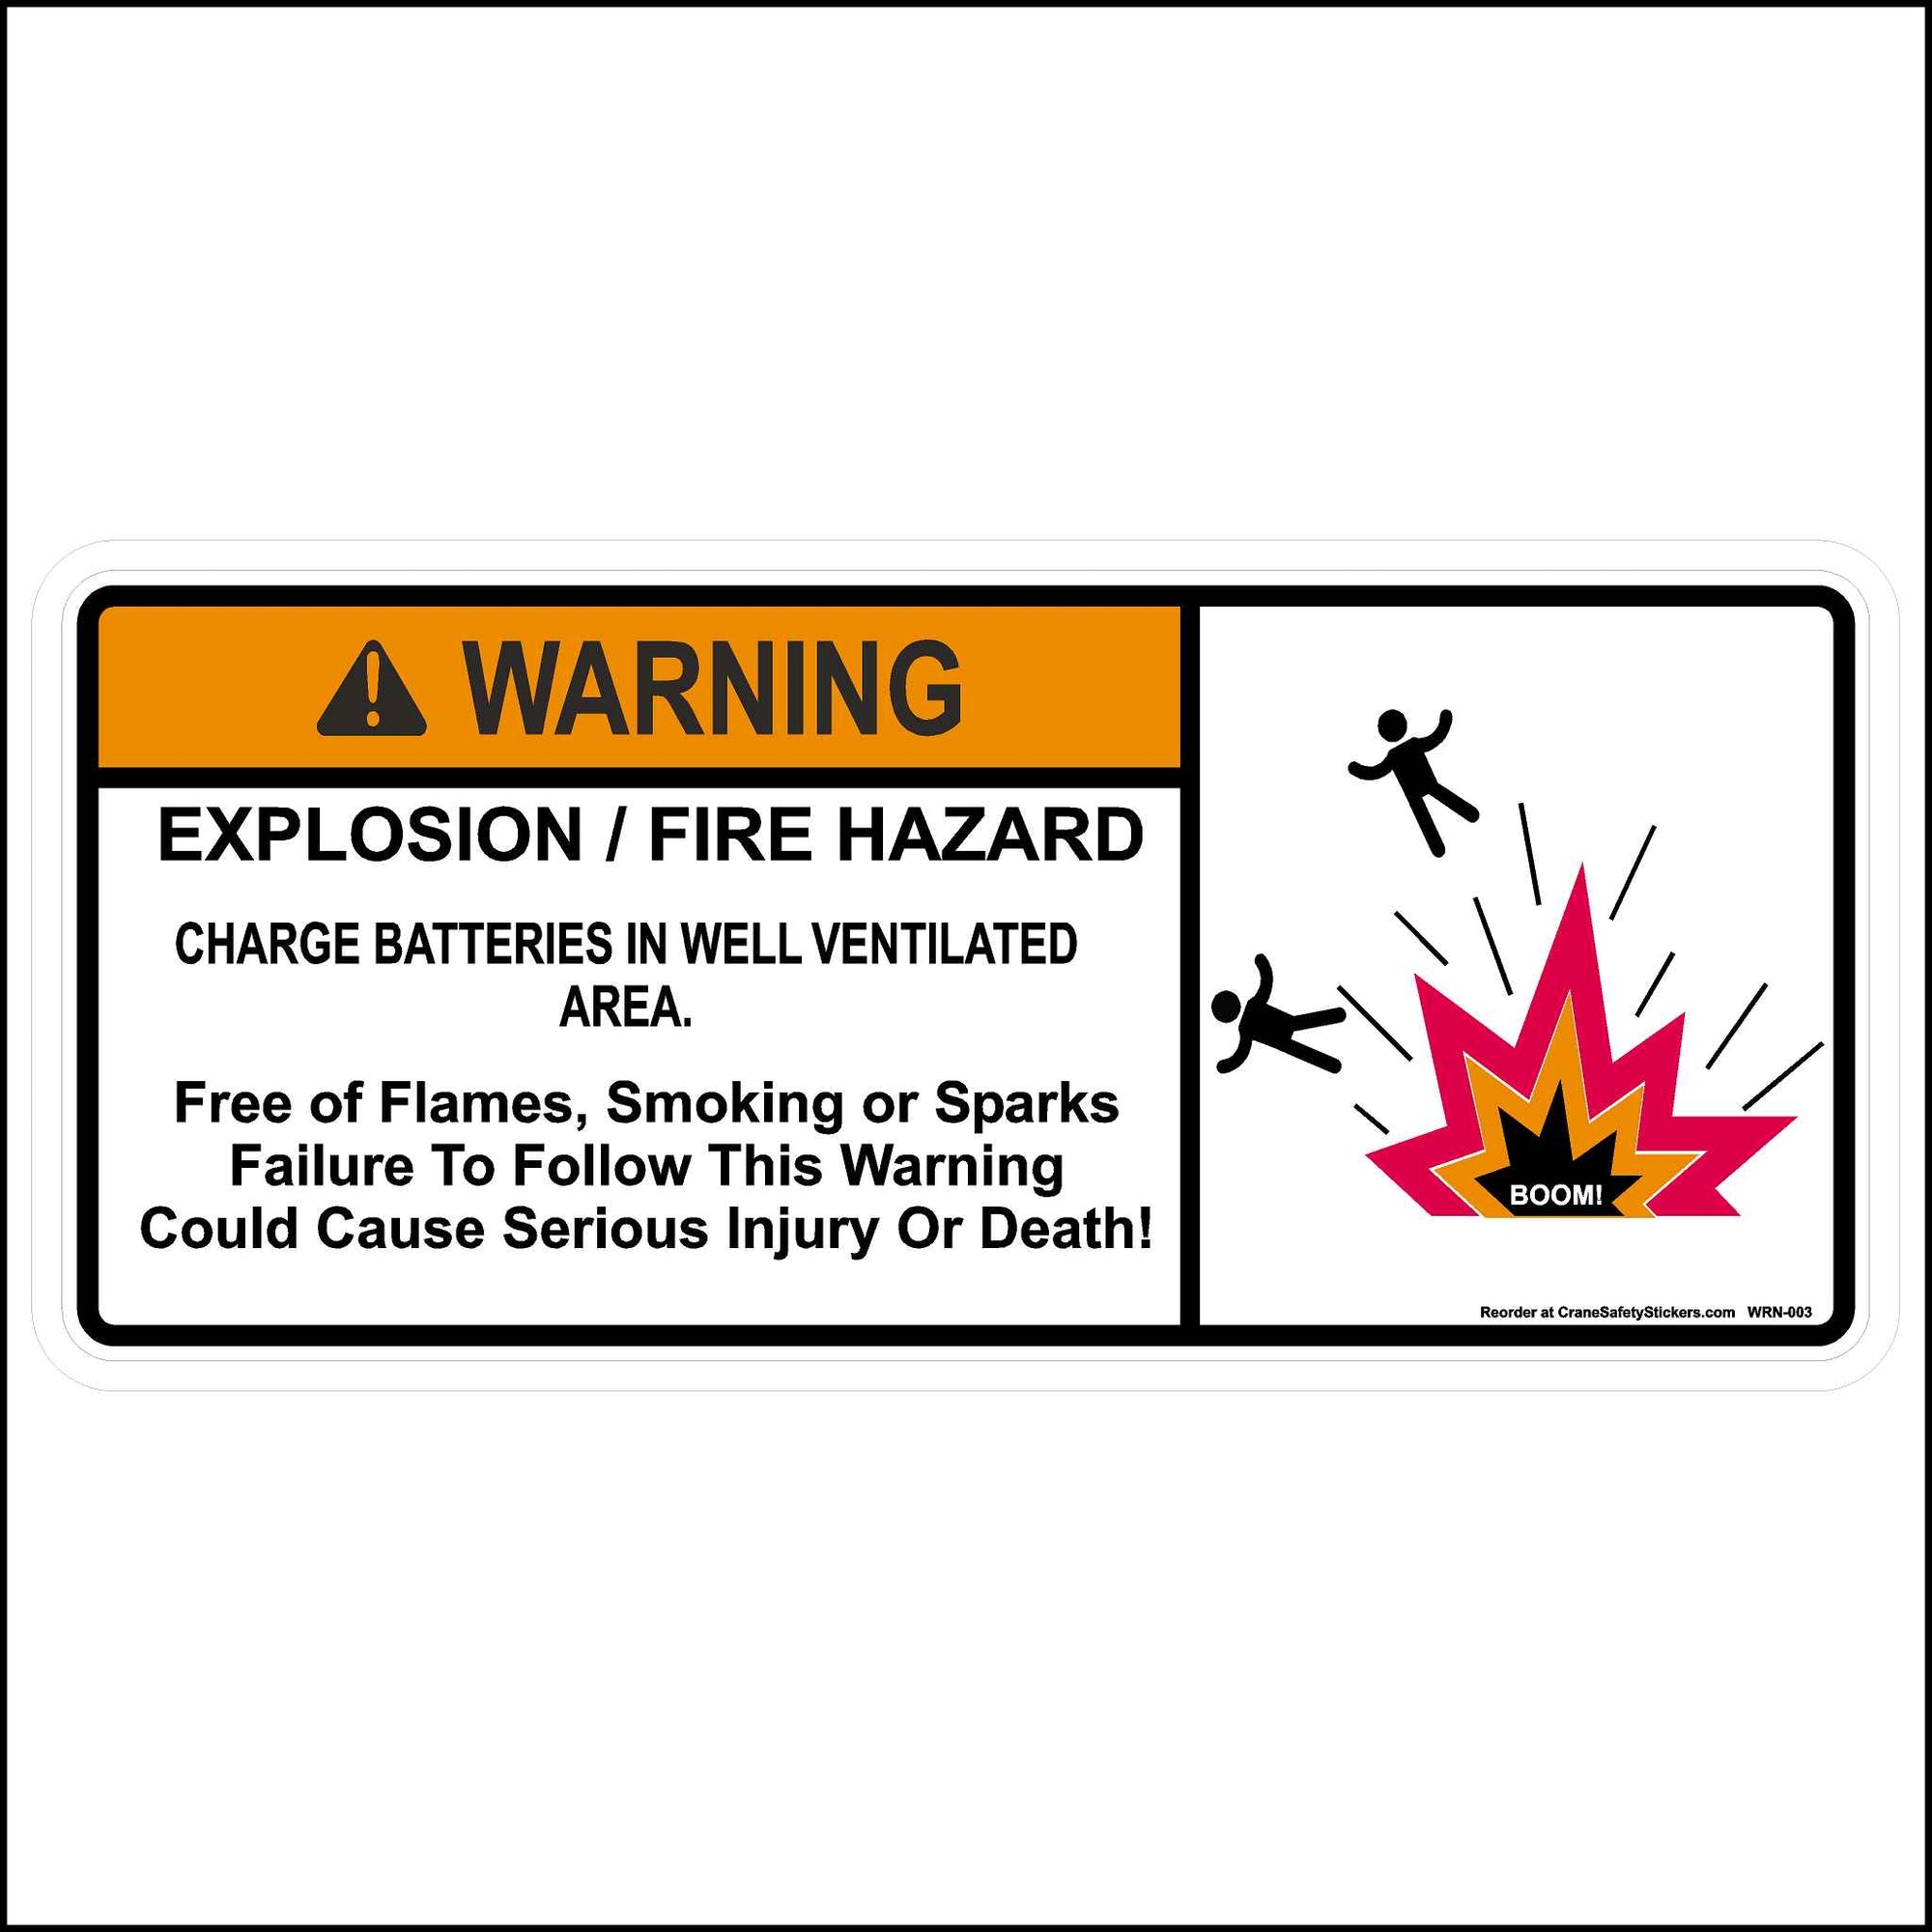 This Battery Warning Label and Battery Fire Hazard Label for Equipment, Cranes, Backhoes, Fork Lifts, and Excavators Is Printed With The Following. WARNING Explosion, Fire Hazard Charge Battery in well Ventilated Area. Free of Flames, Smoking, Or Sparks. Failure To Follow this Warning Could Cause Serious Injury Or Death.